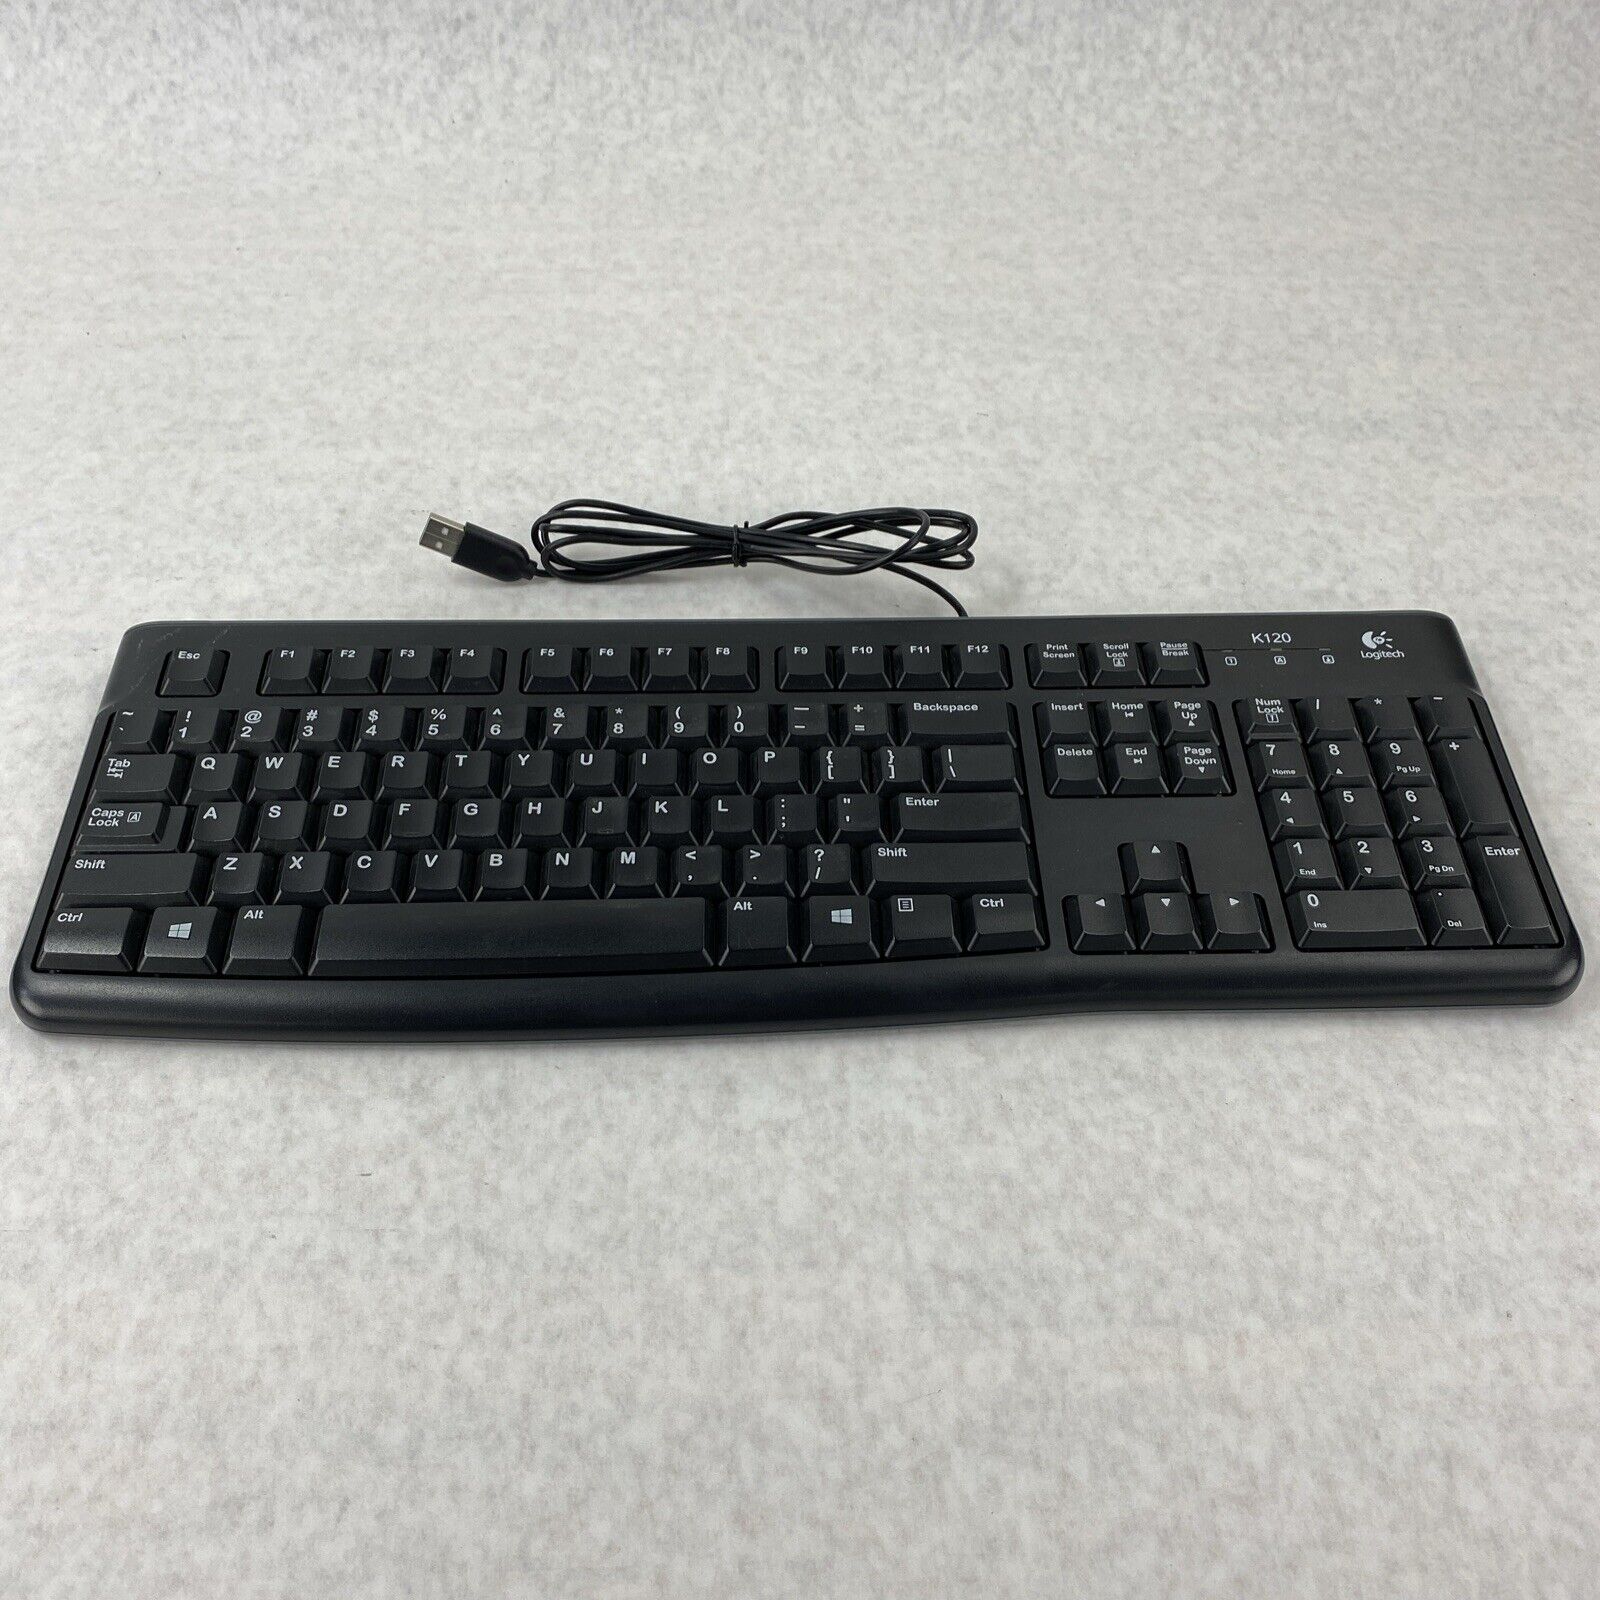 Lot of 6 Logitech K120 Wired Plug-and-Play USB Standard Keyboard